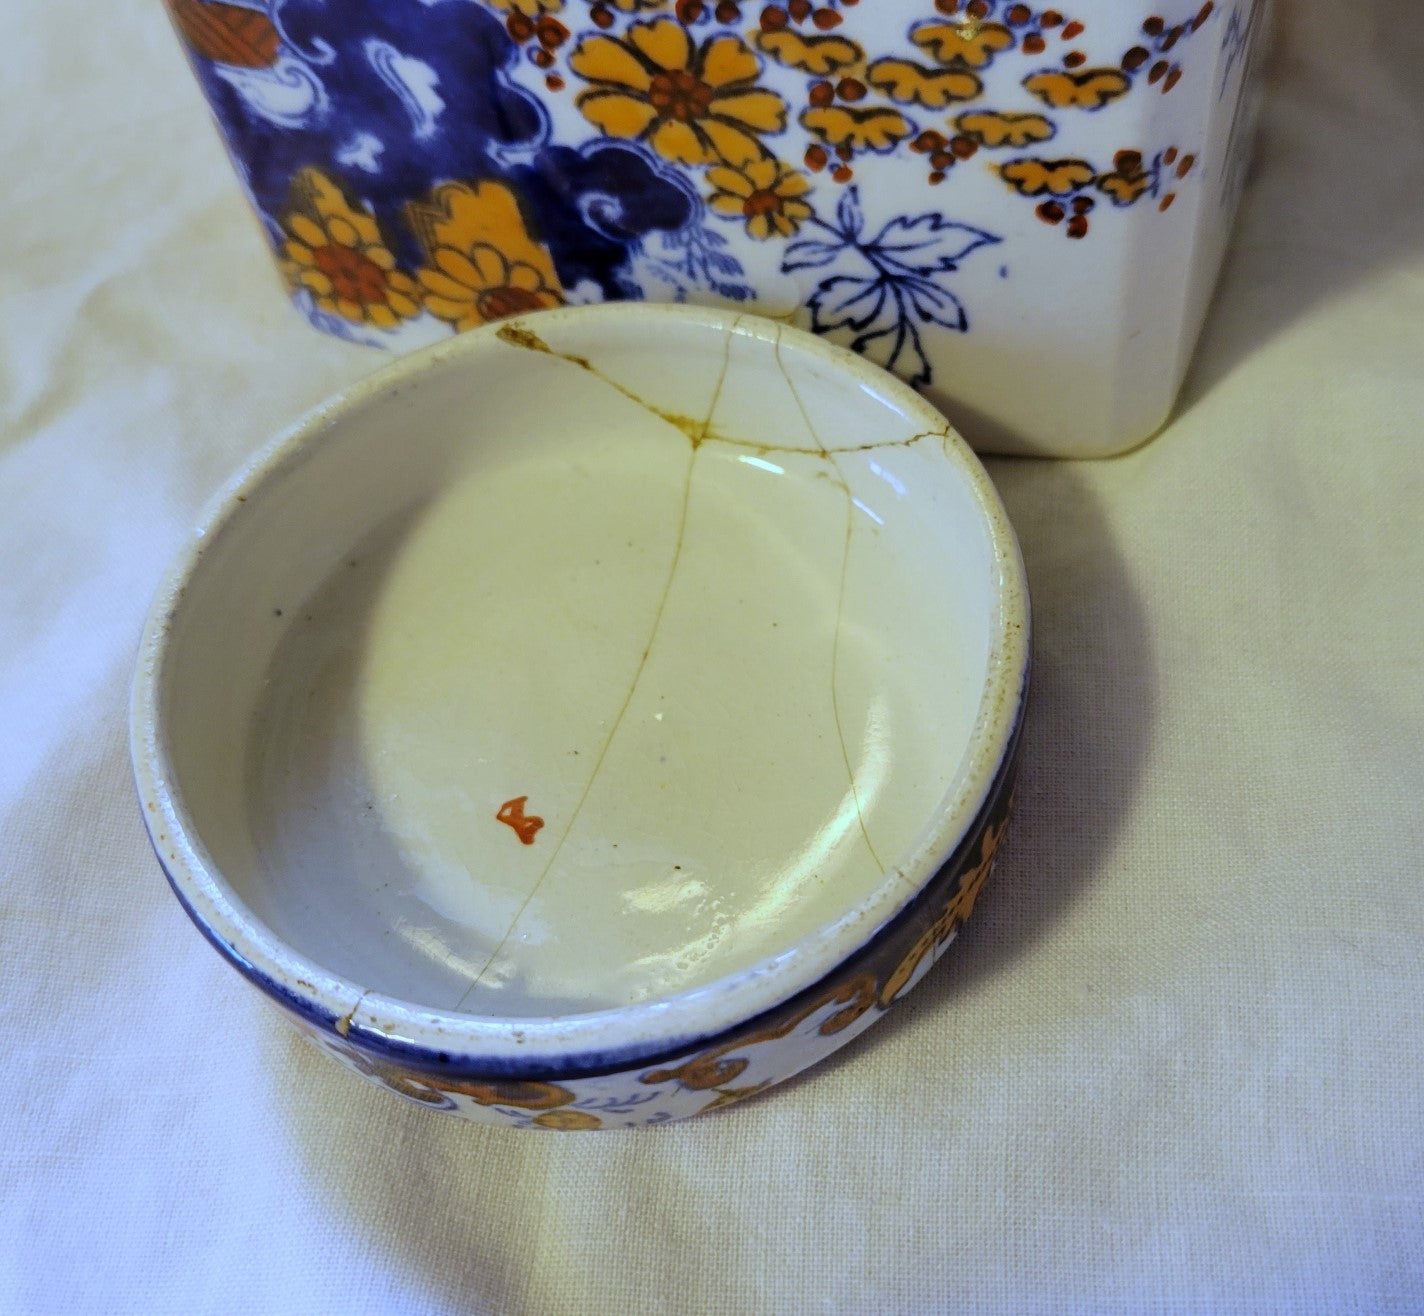 Antique porcelain jar, Imari style, made by Ridgway in England, circa 1900. View of lid.